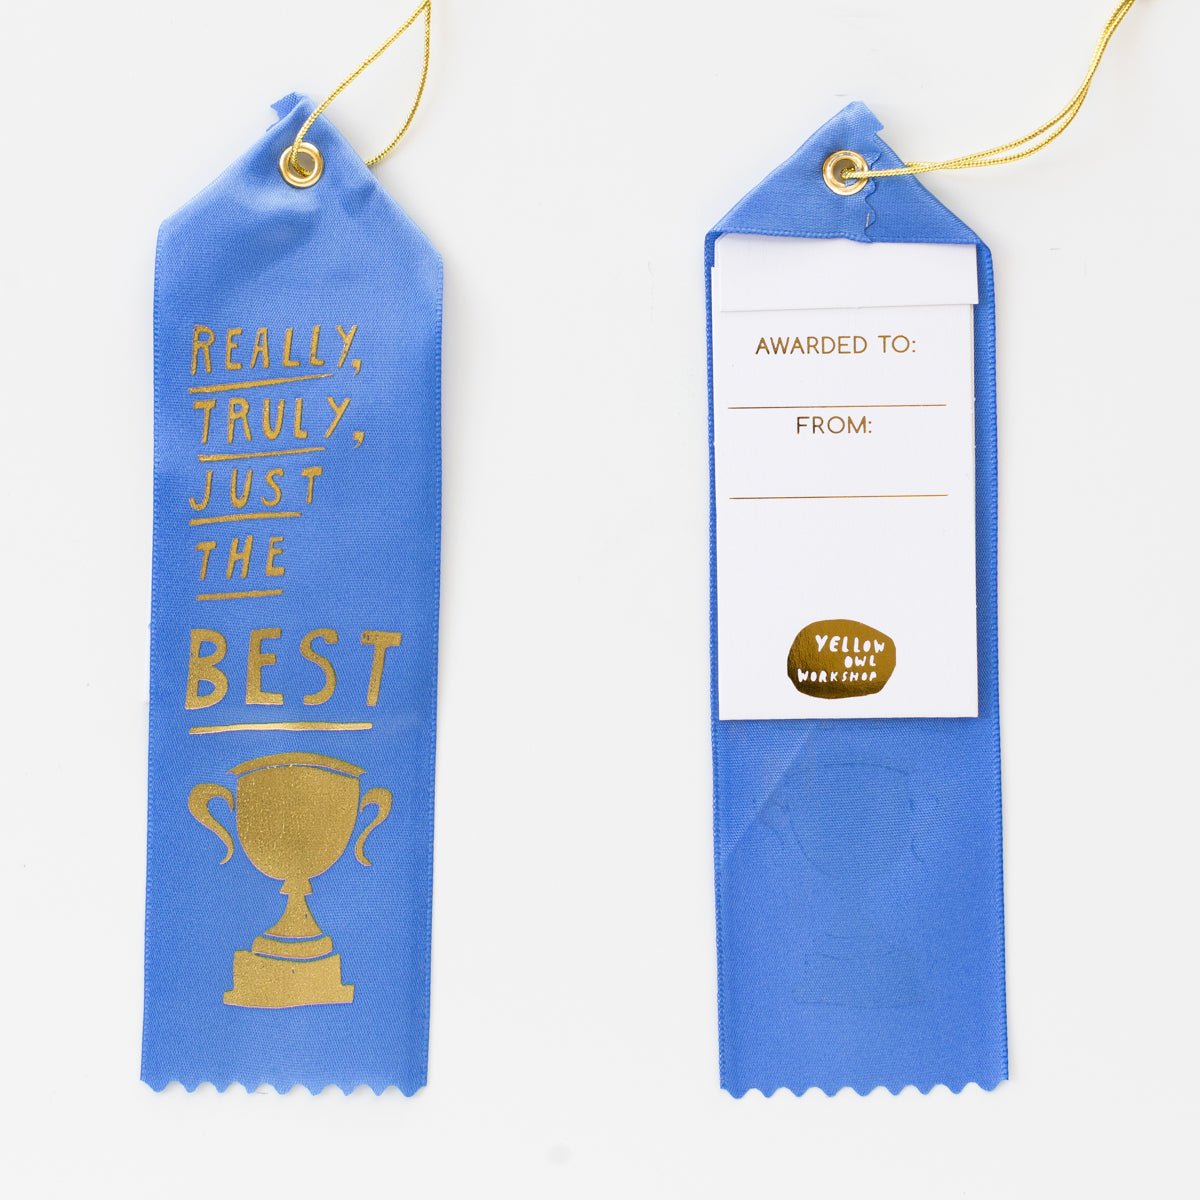 Really Truly Just the Best - Award Ribbon Card - Yellow Owl Workshop